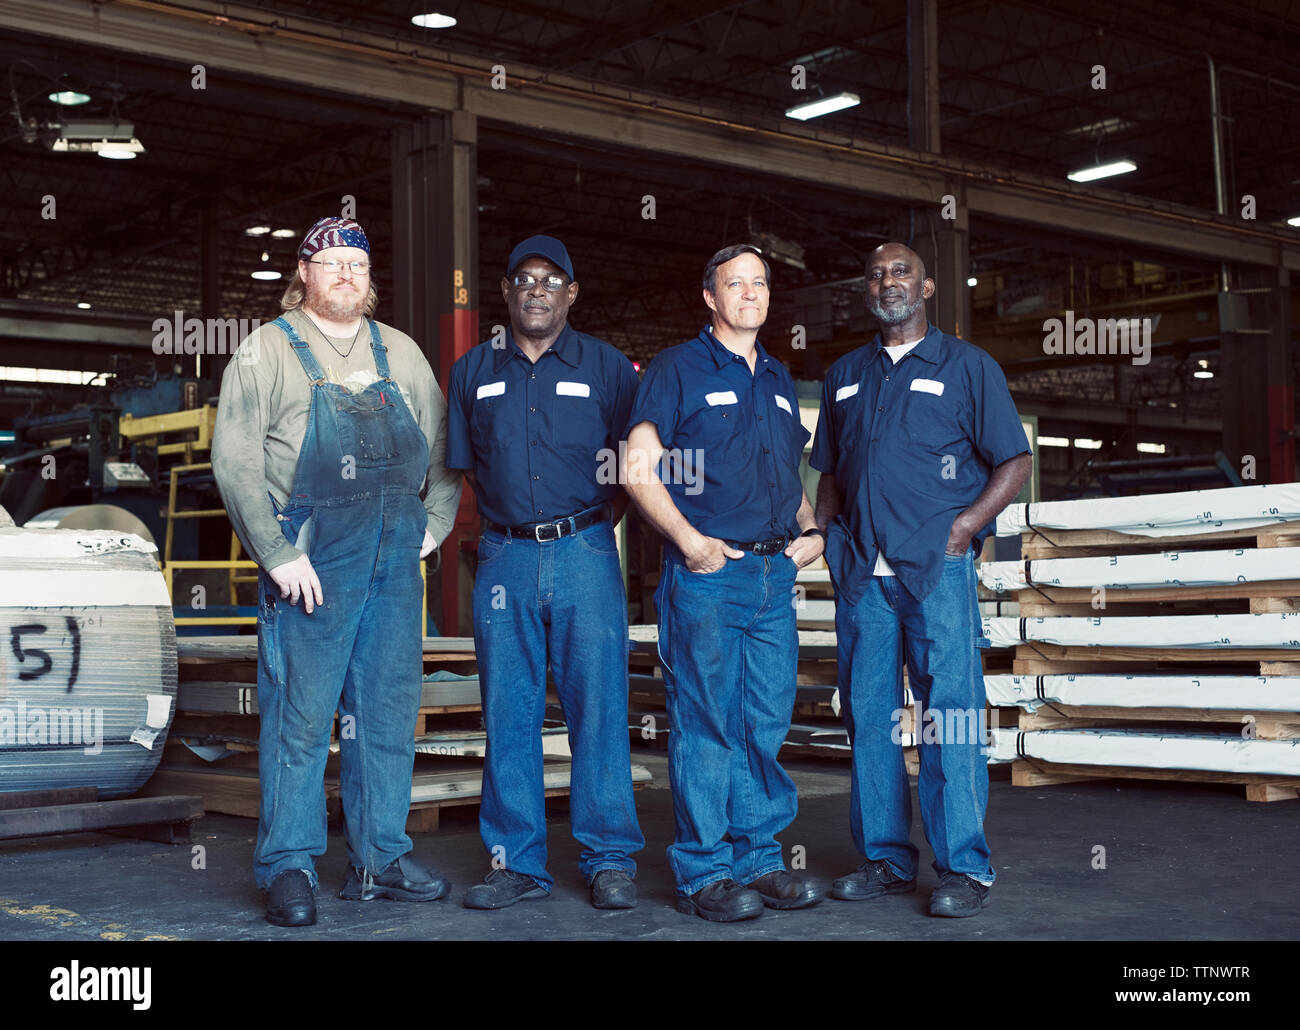 Full length portrait of coworkers standing against manufacturing objects in industry Stock Photo